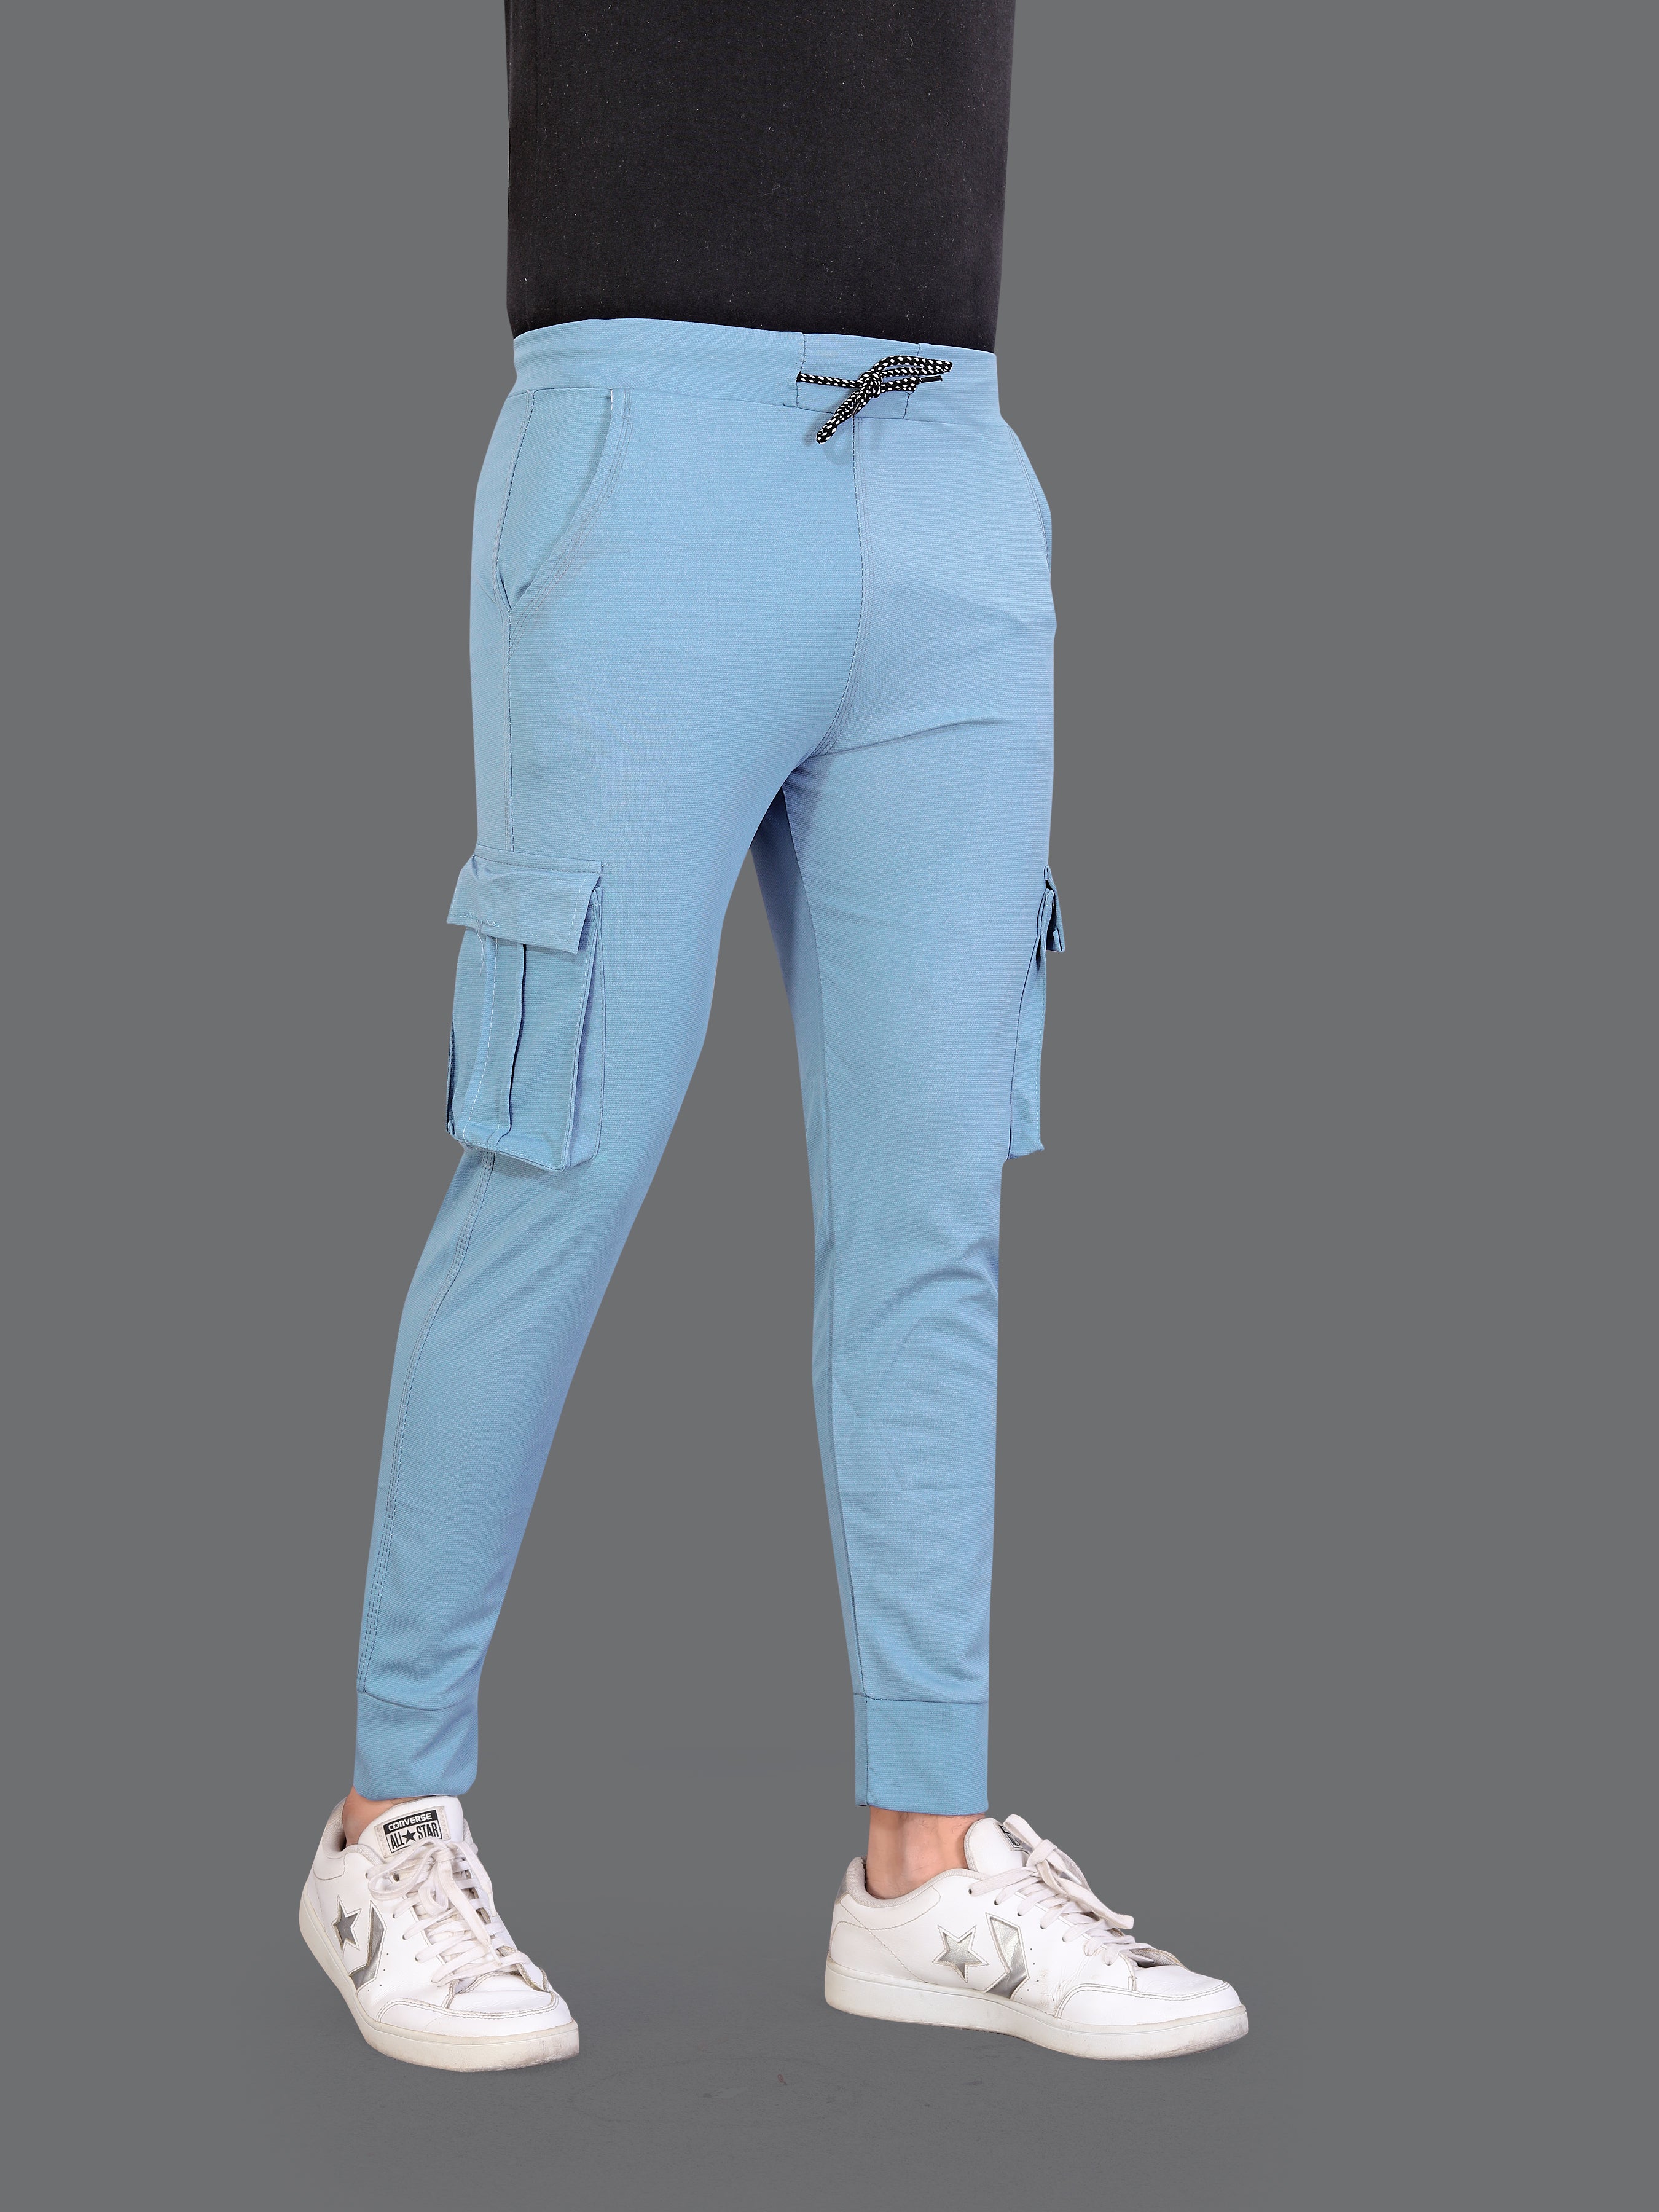 Buy Regular Trouser Pants Maroon Sky Blue and Black Combo of 3 Cotton for  Best Price, Reviews, Free Shipping